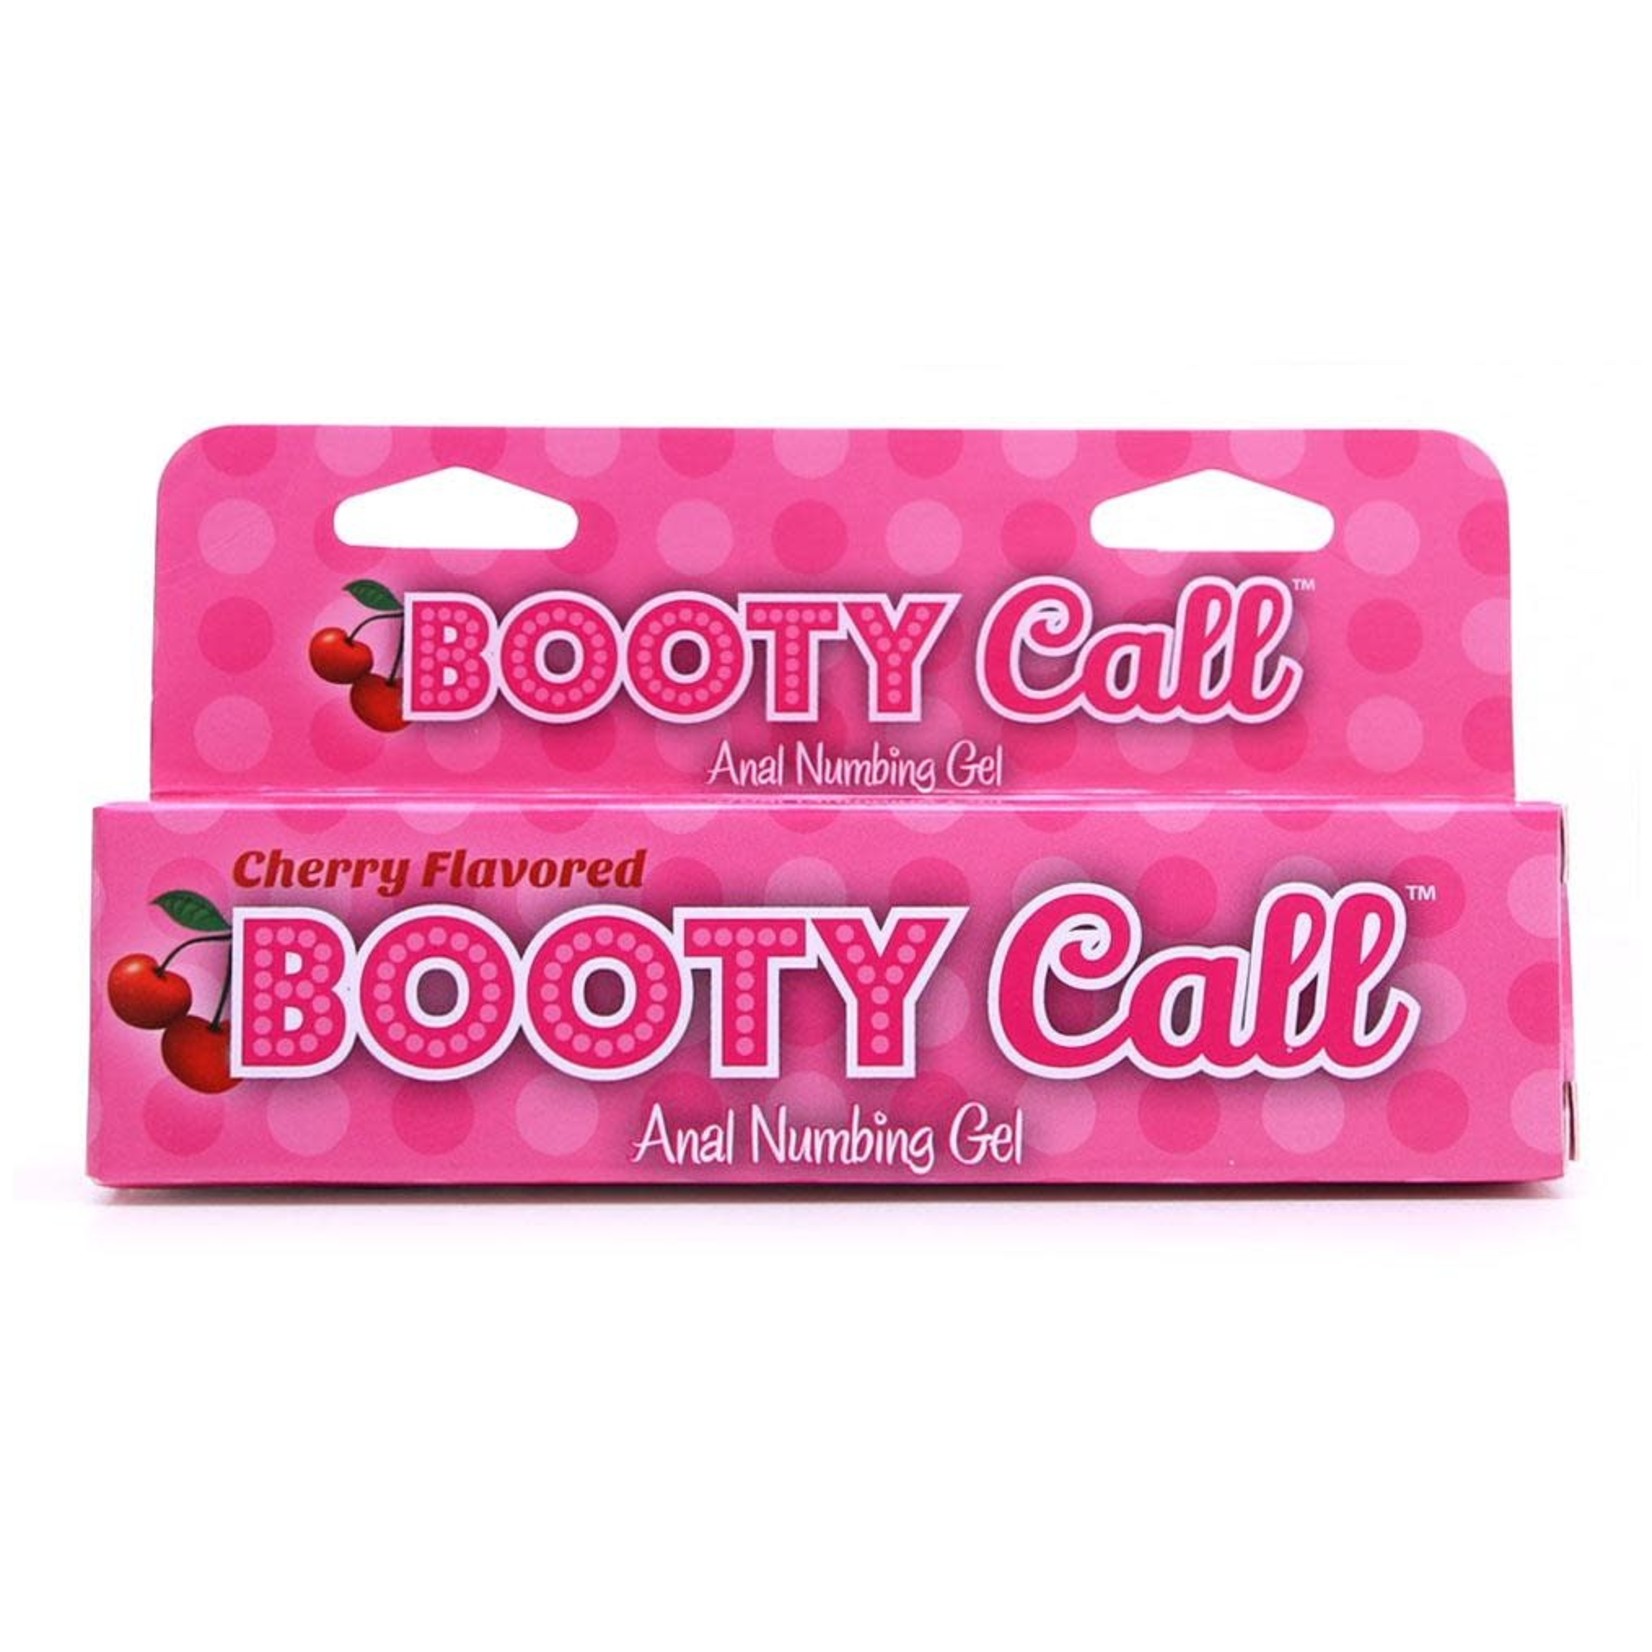 BOOTY CALL - CHERRY ANAL NUMBING GEL - 1.5OZ